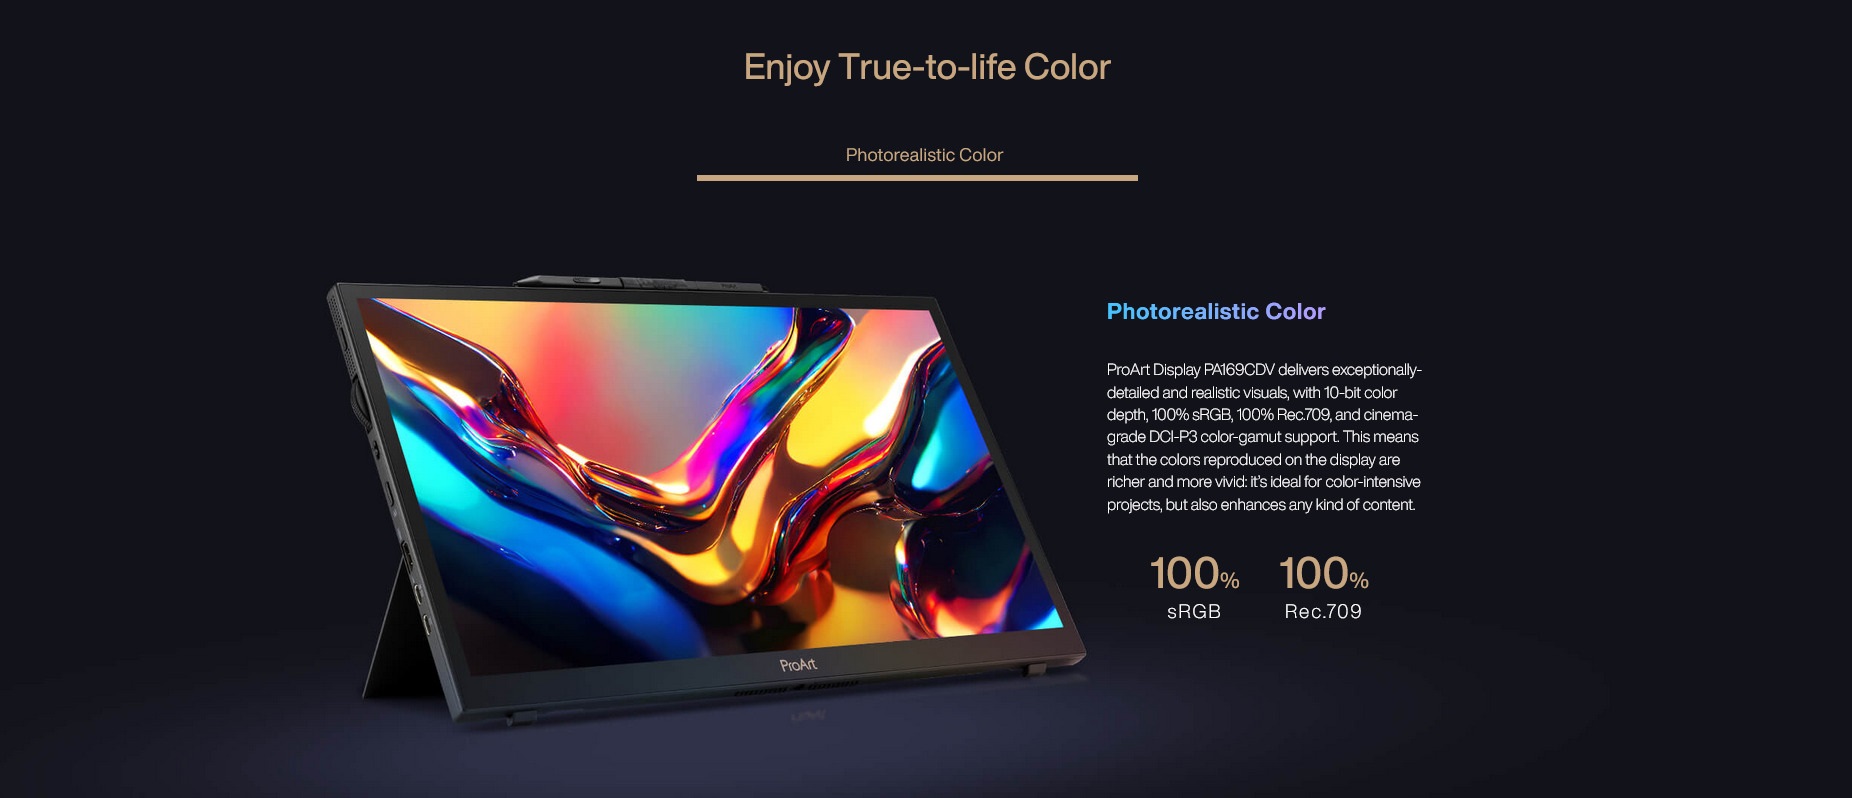 A large marketing image providing additional information about the product ASUS ProArt PA169CDV 15.6" UHD 60Hz IPS Touch Monitor - Additional alt info not provided